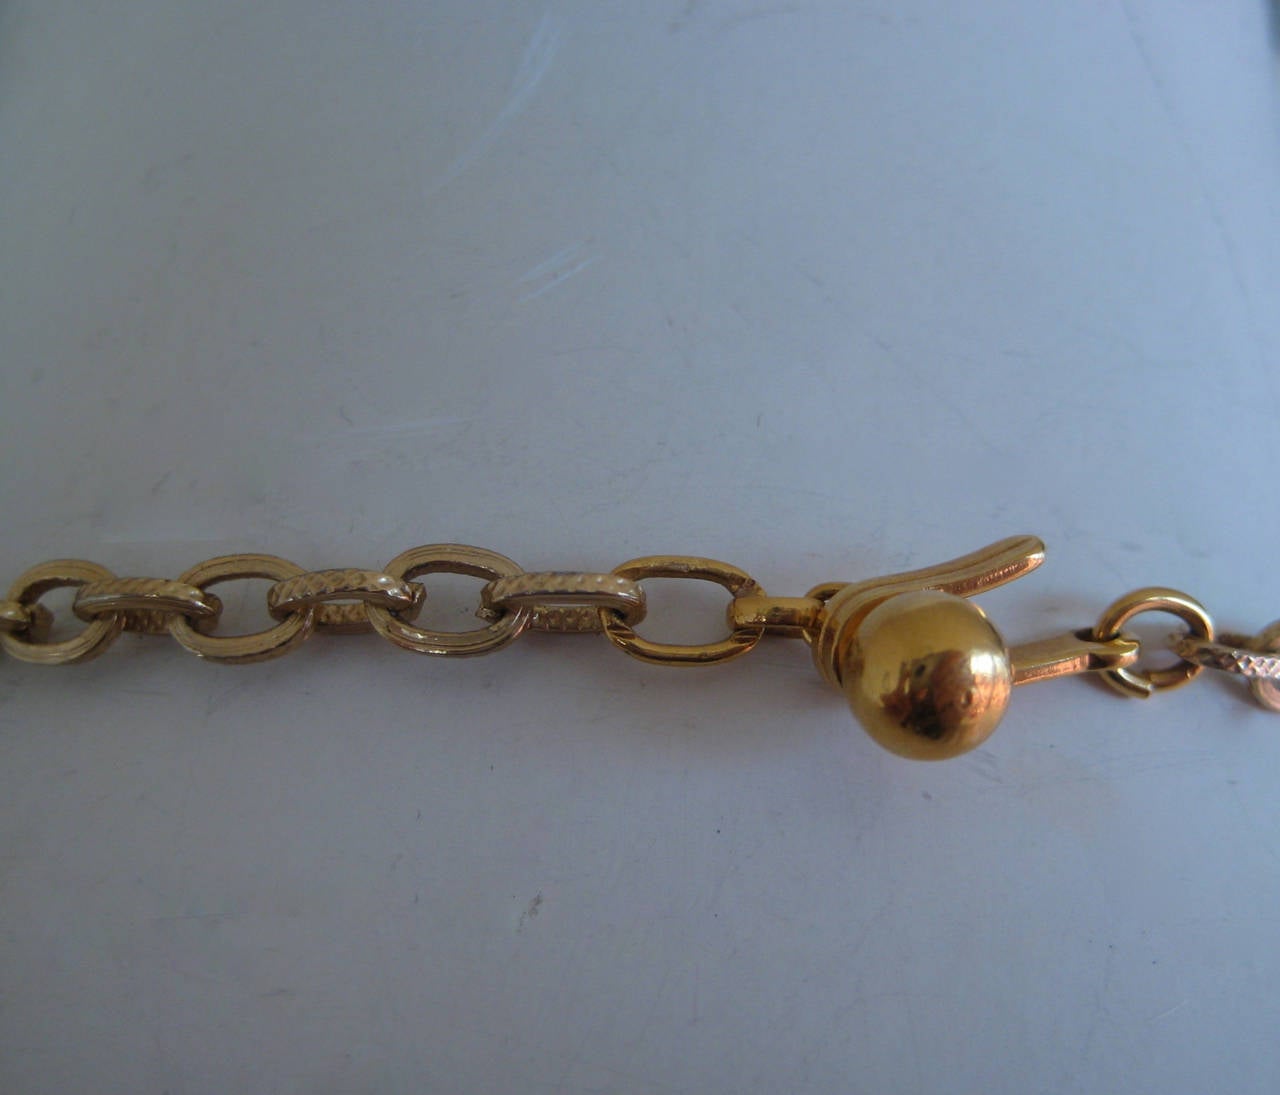 1970s Trifari Modernist Necklace In Excellent Condition For Sale In Chicago, IL